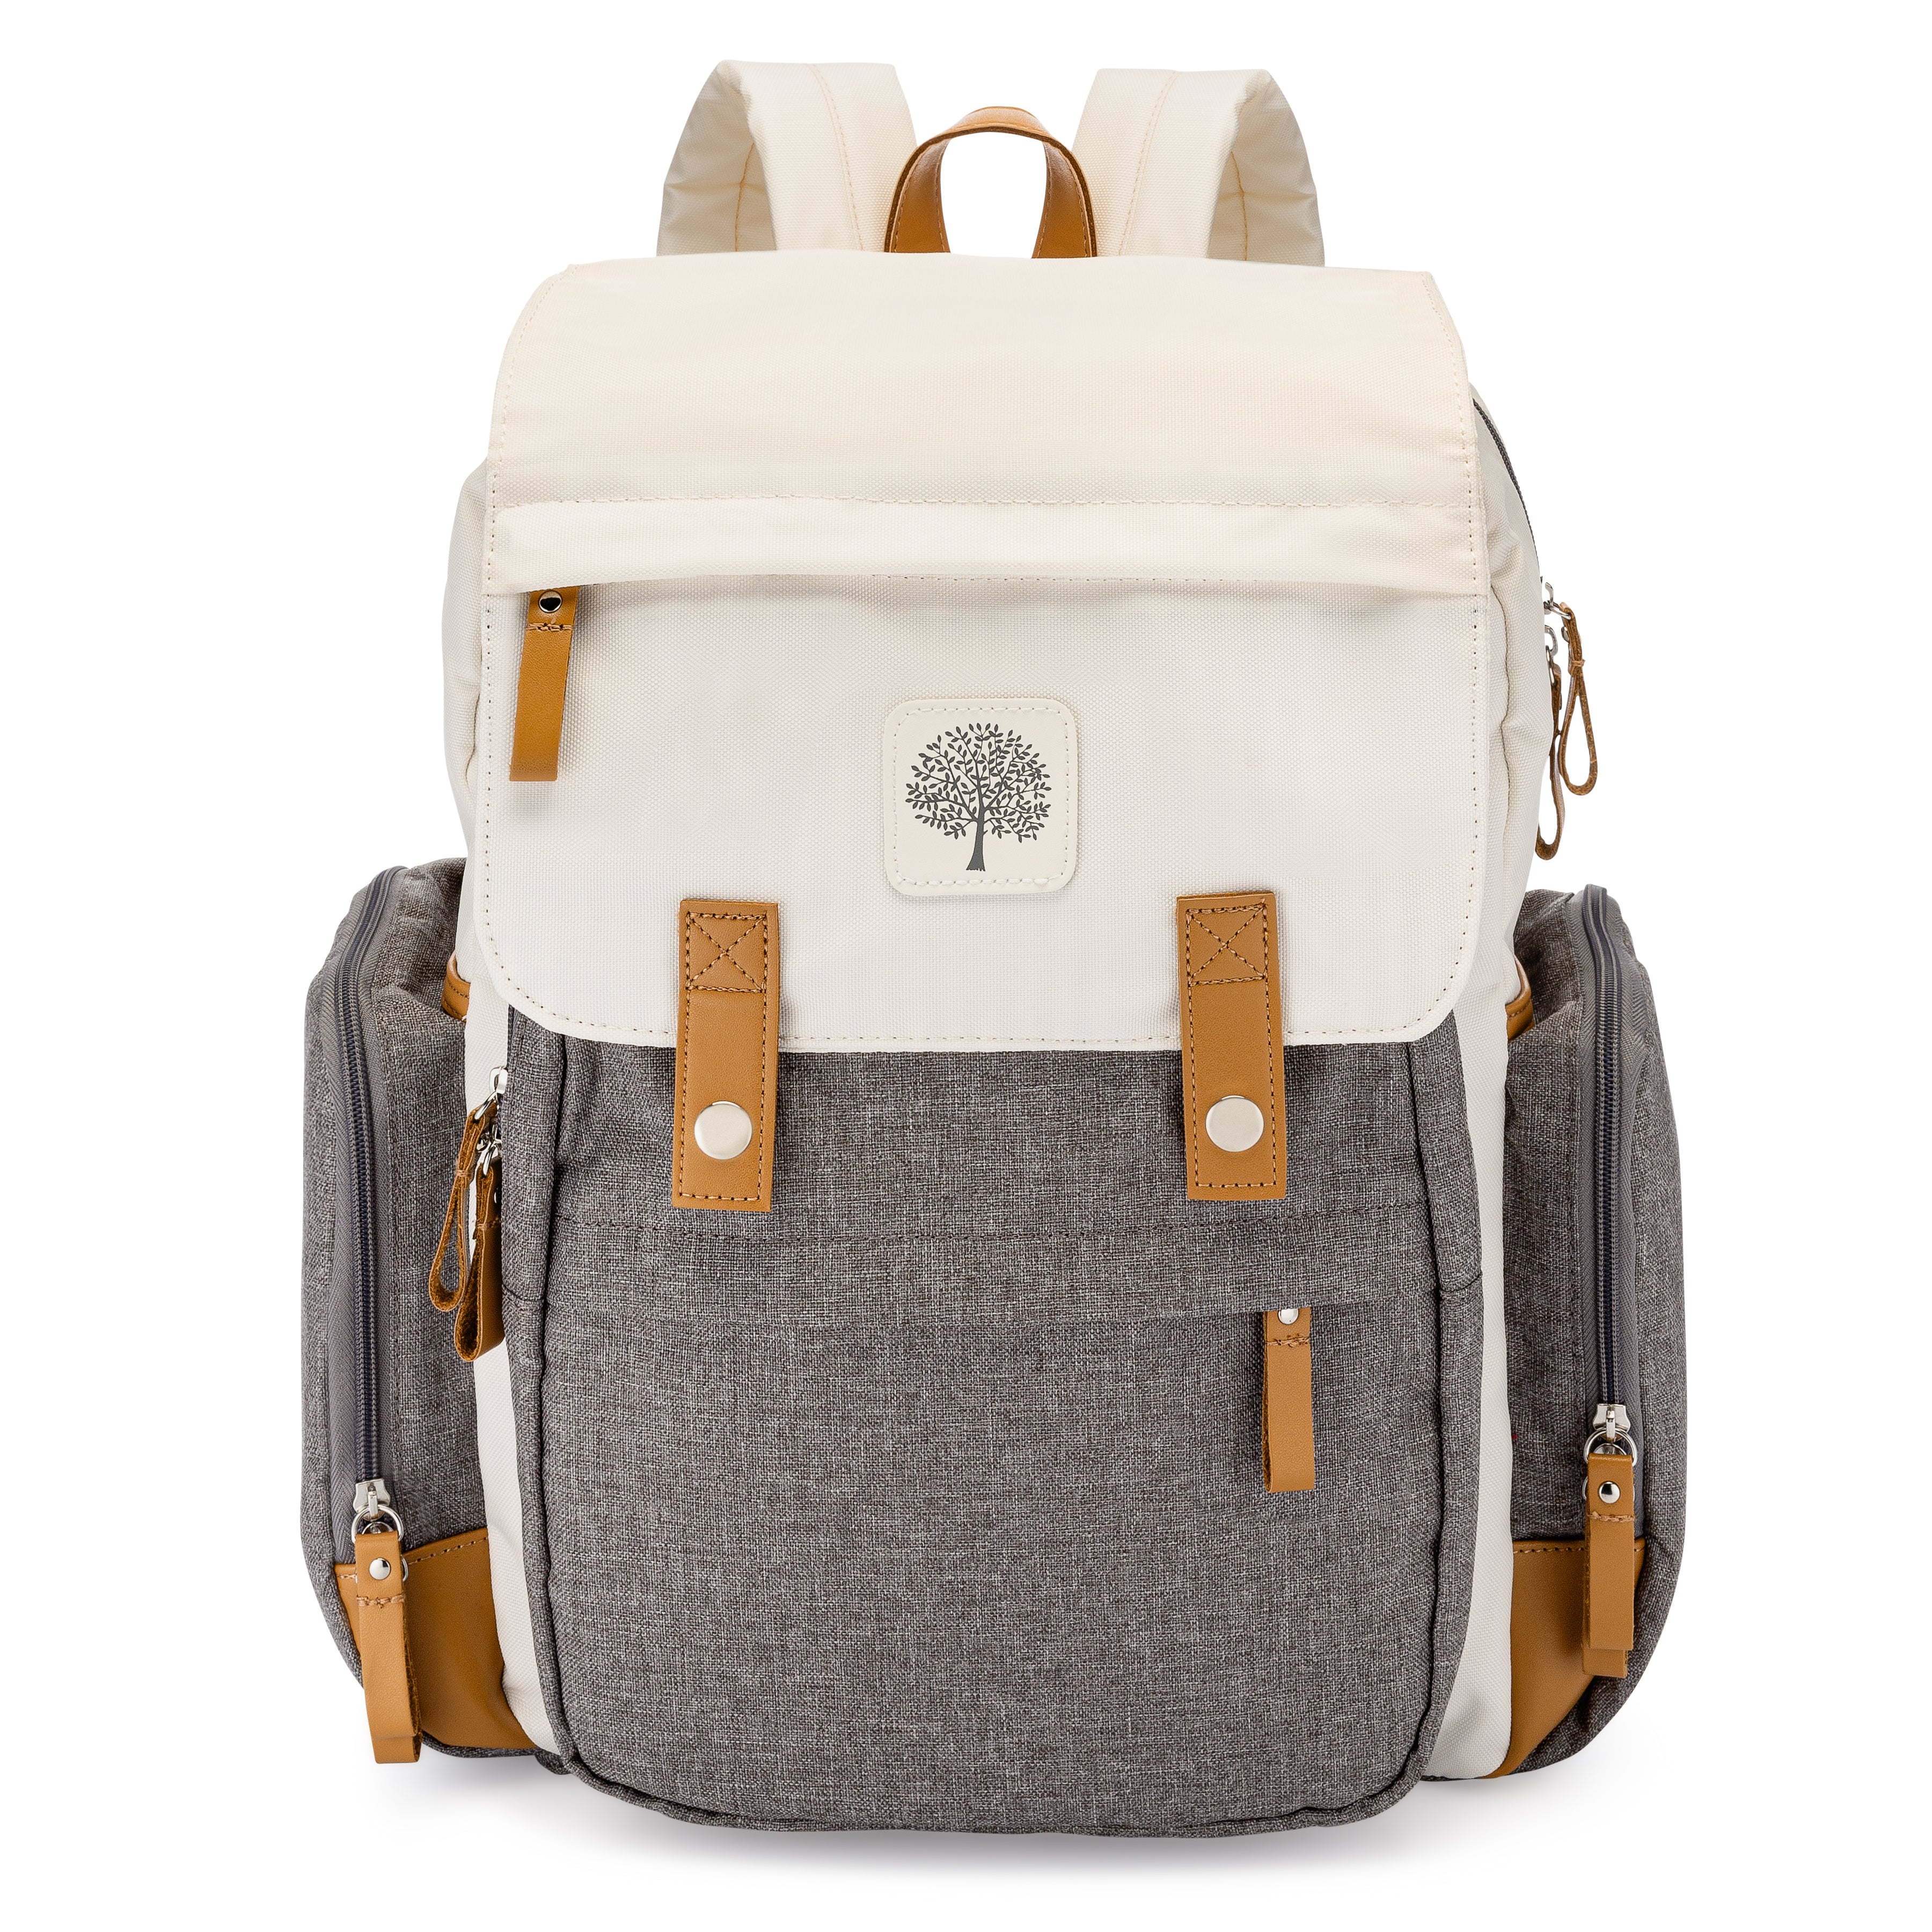 24 Best Diaper Bags in 2023 For Modern Parenting Style